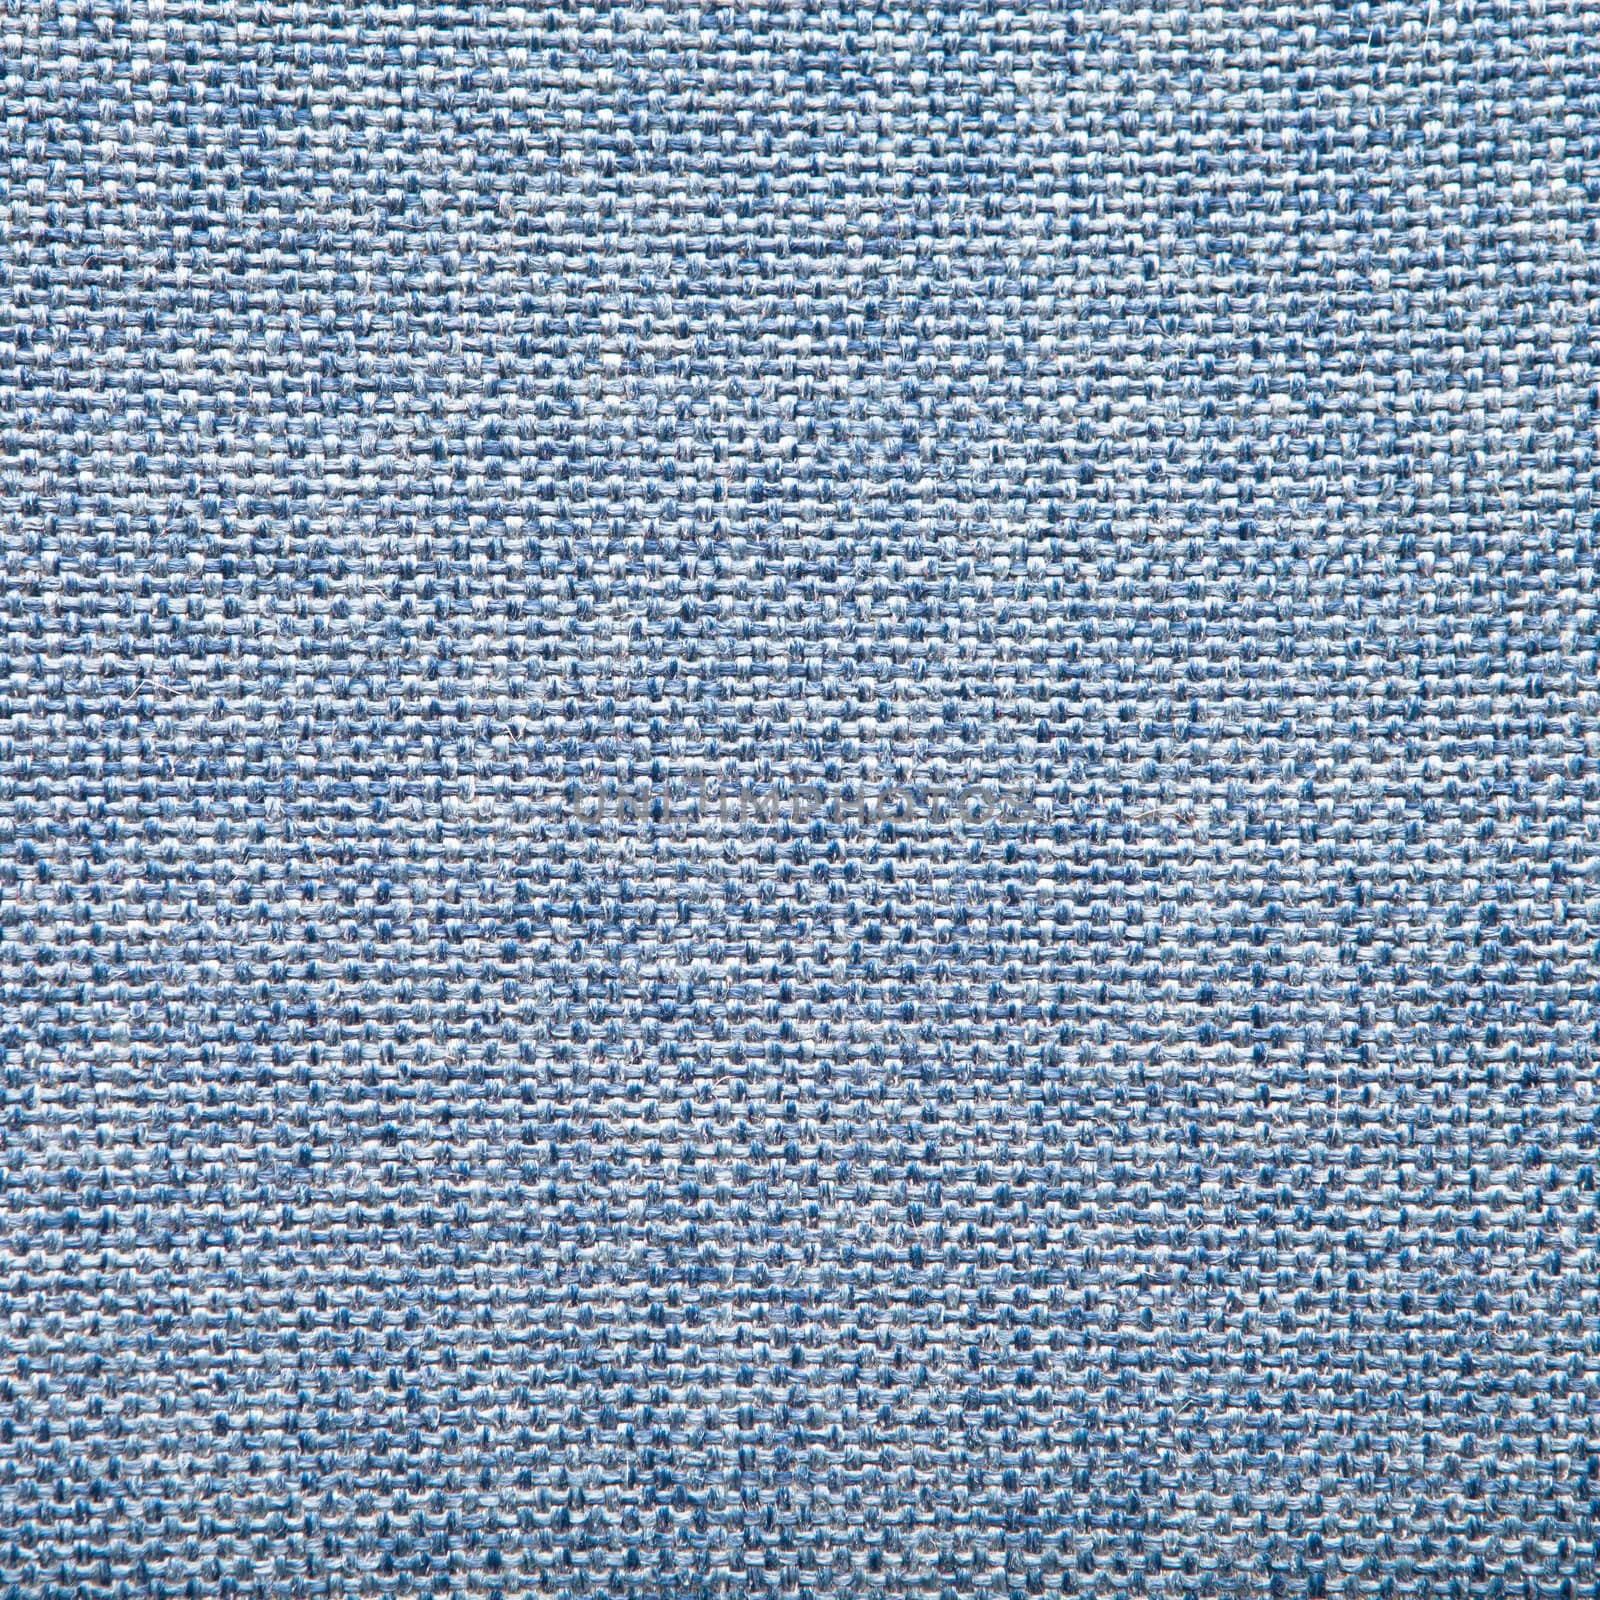 Coarse blue fabric from a chair as a background image